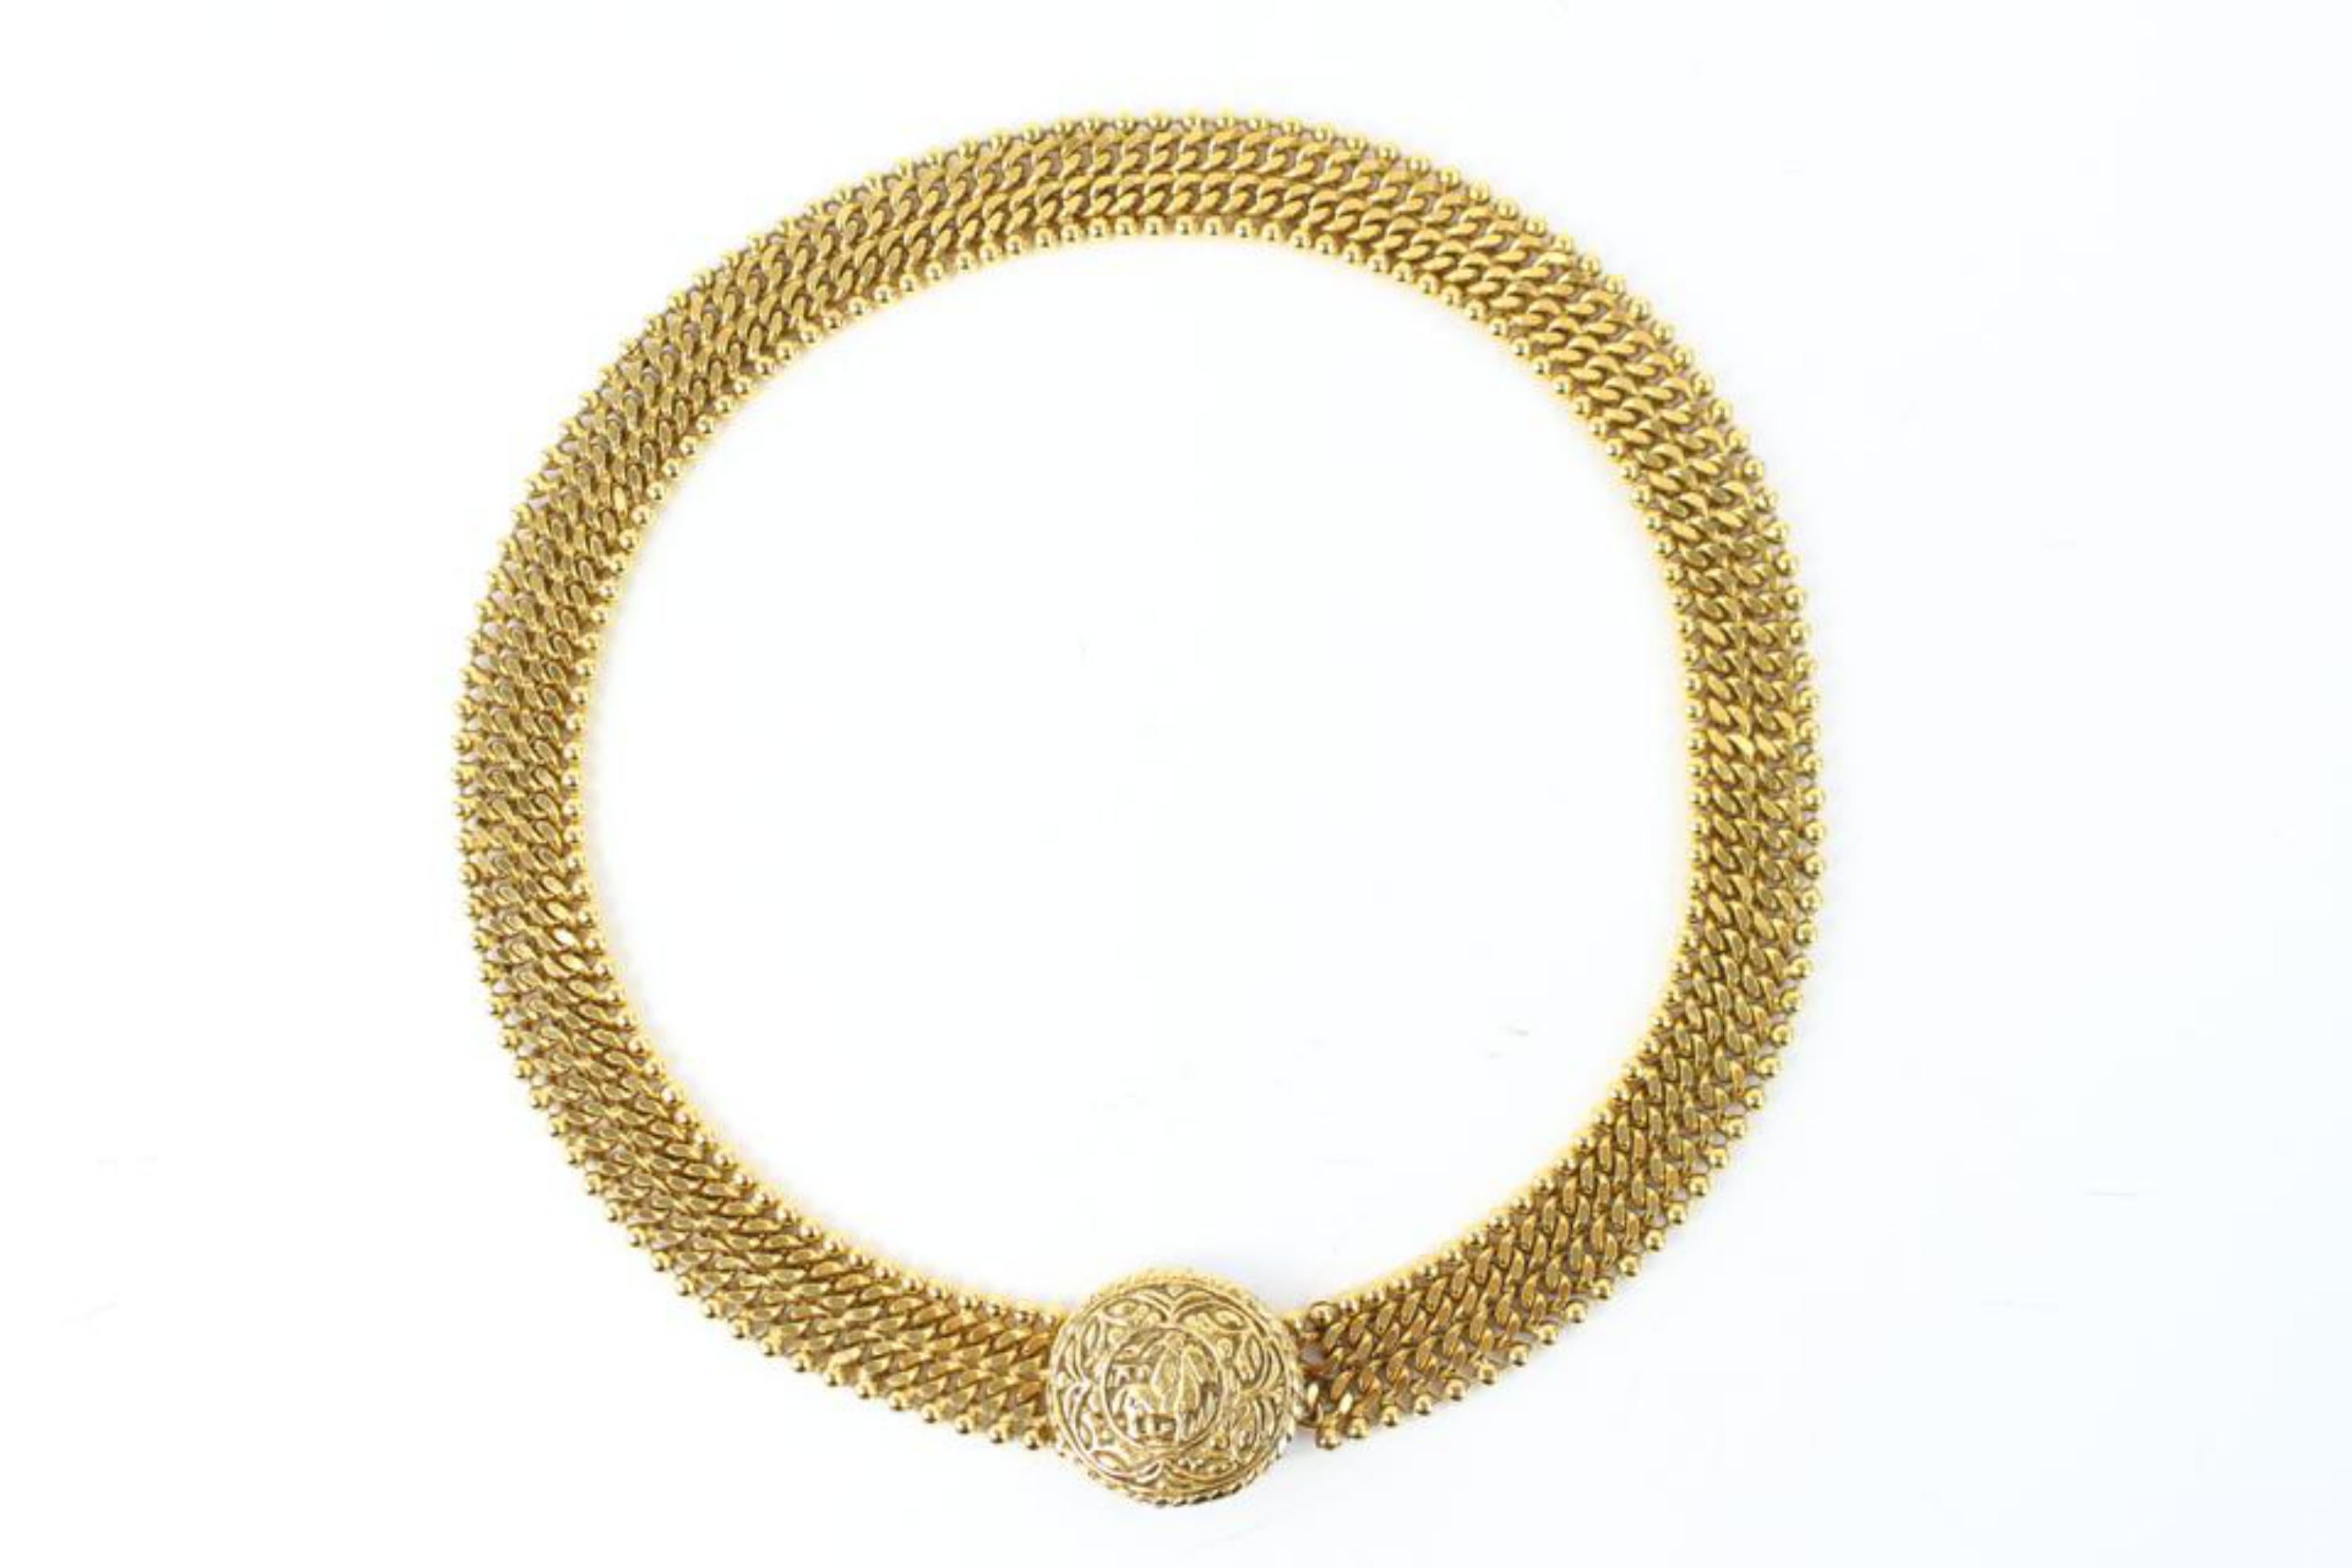 Chanel Gold Chain Or Necklace 2way 18cz0717 Belt In Good Condition For Sale In Forest Hills, NY